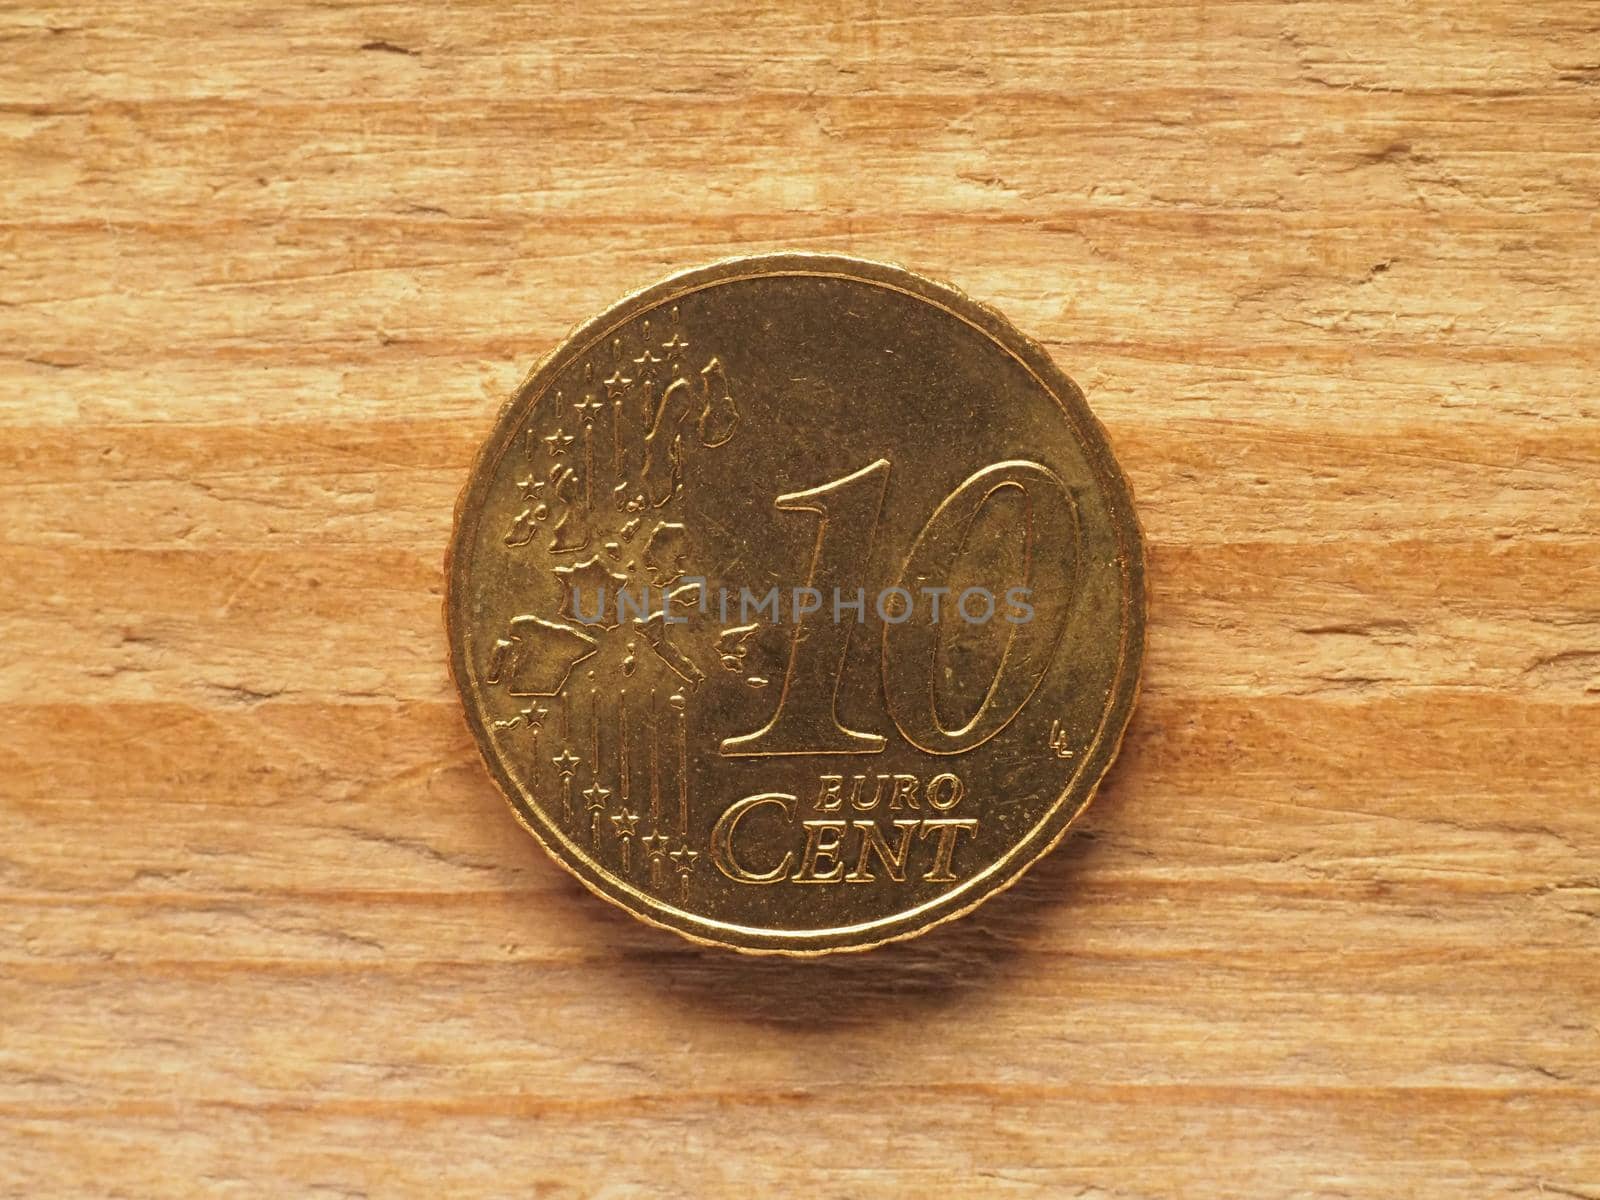 10 cents coin common side, currency of Europe by claudiodivizia